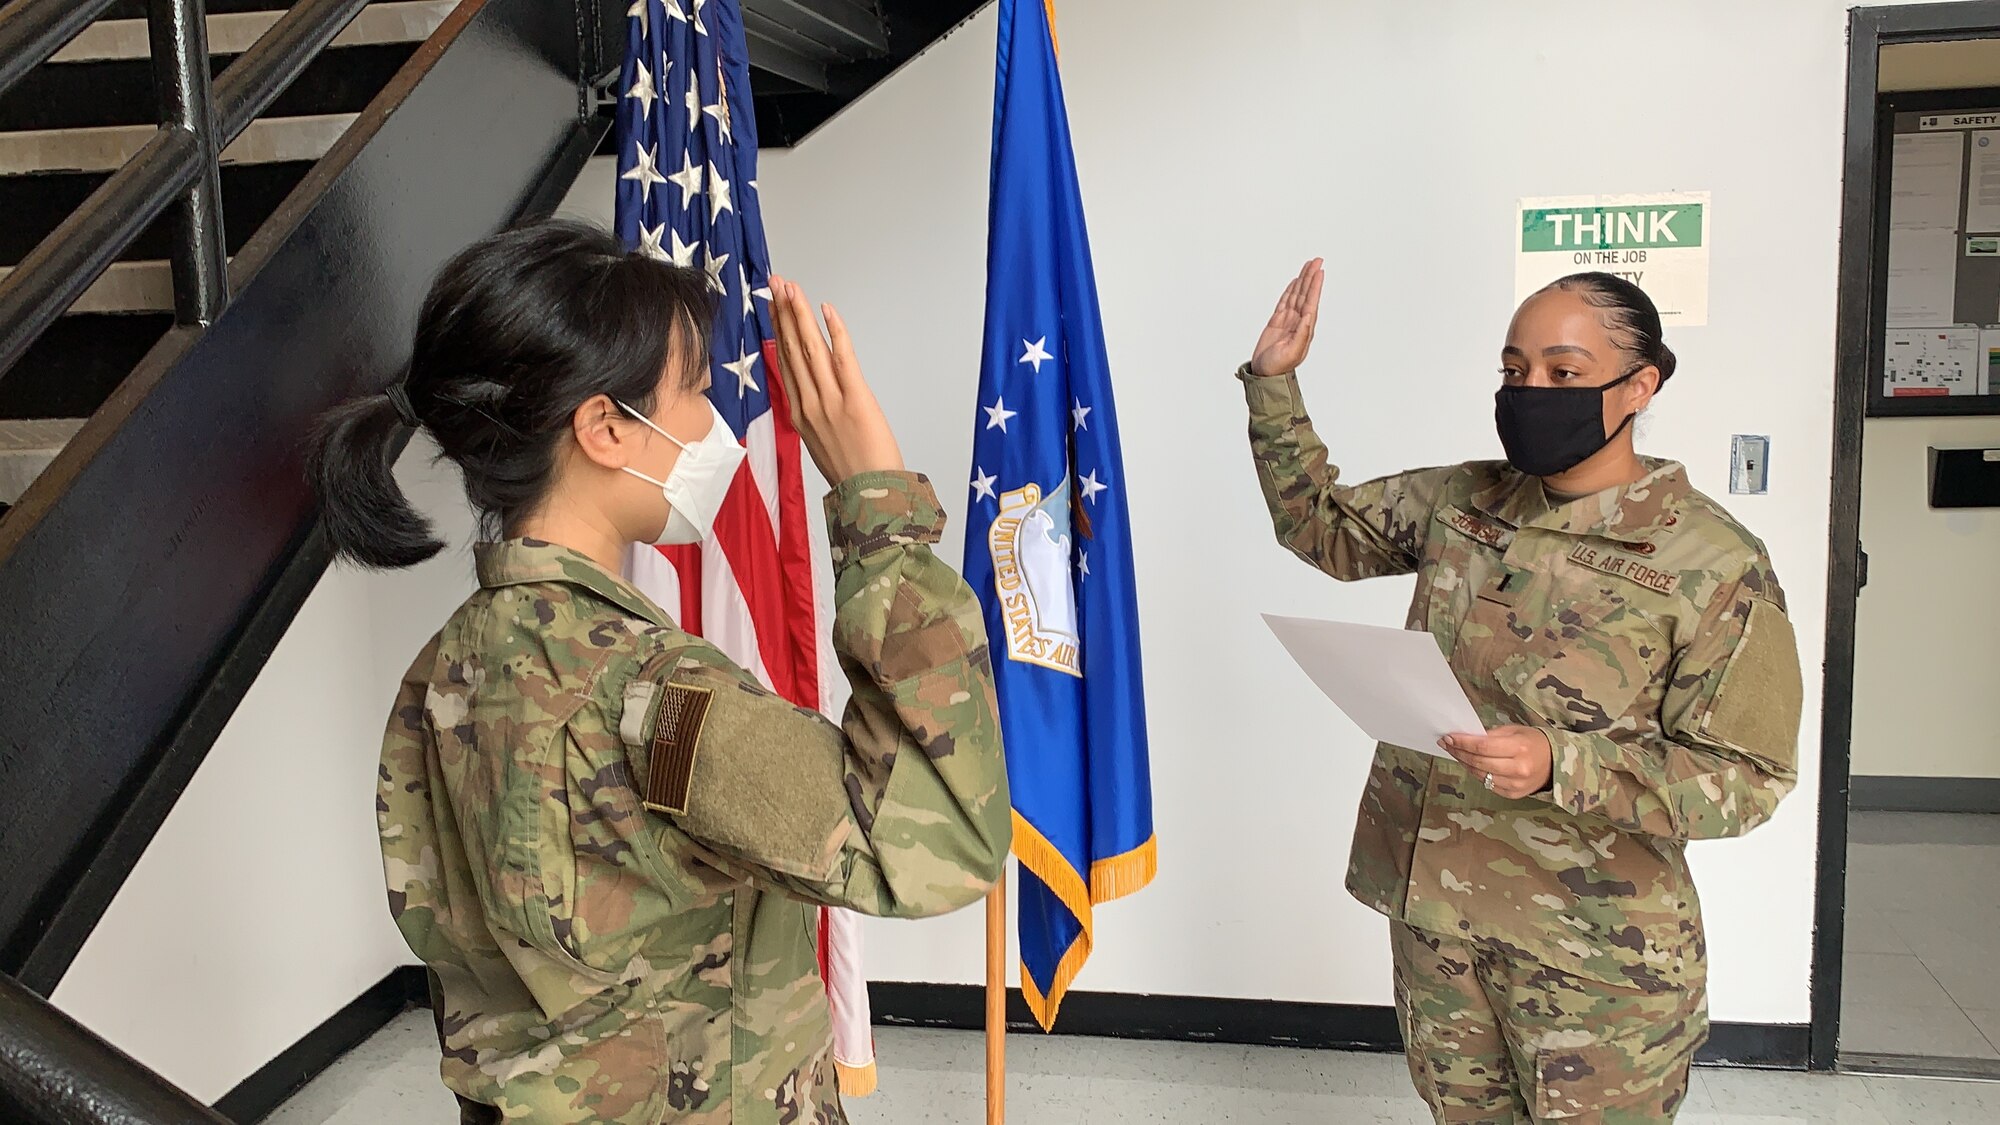 1st Lt. Shakia Johnson, 69th Aerial Port Squadron, swears Staff Sgt. Dana Lee, 69th APS, air transportation technician, into active duty June 15, 2020, at Joint Base Andrews. Md. Lee is one of eight Airmen selected Air Force-wide for the Enlisted to Medical Degree Preparatory Program. (Courtesy photo)